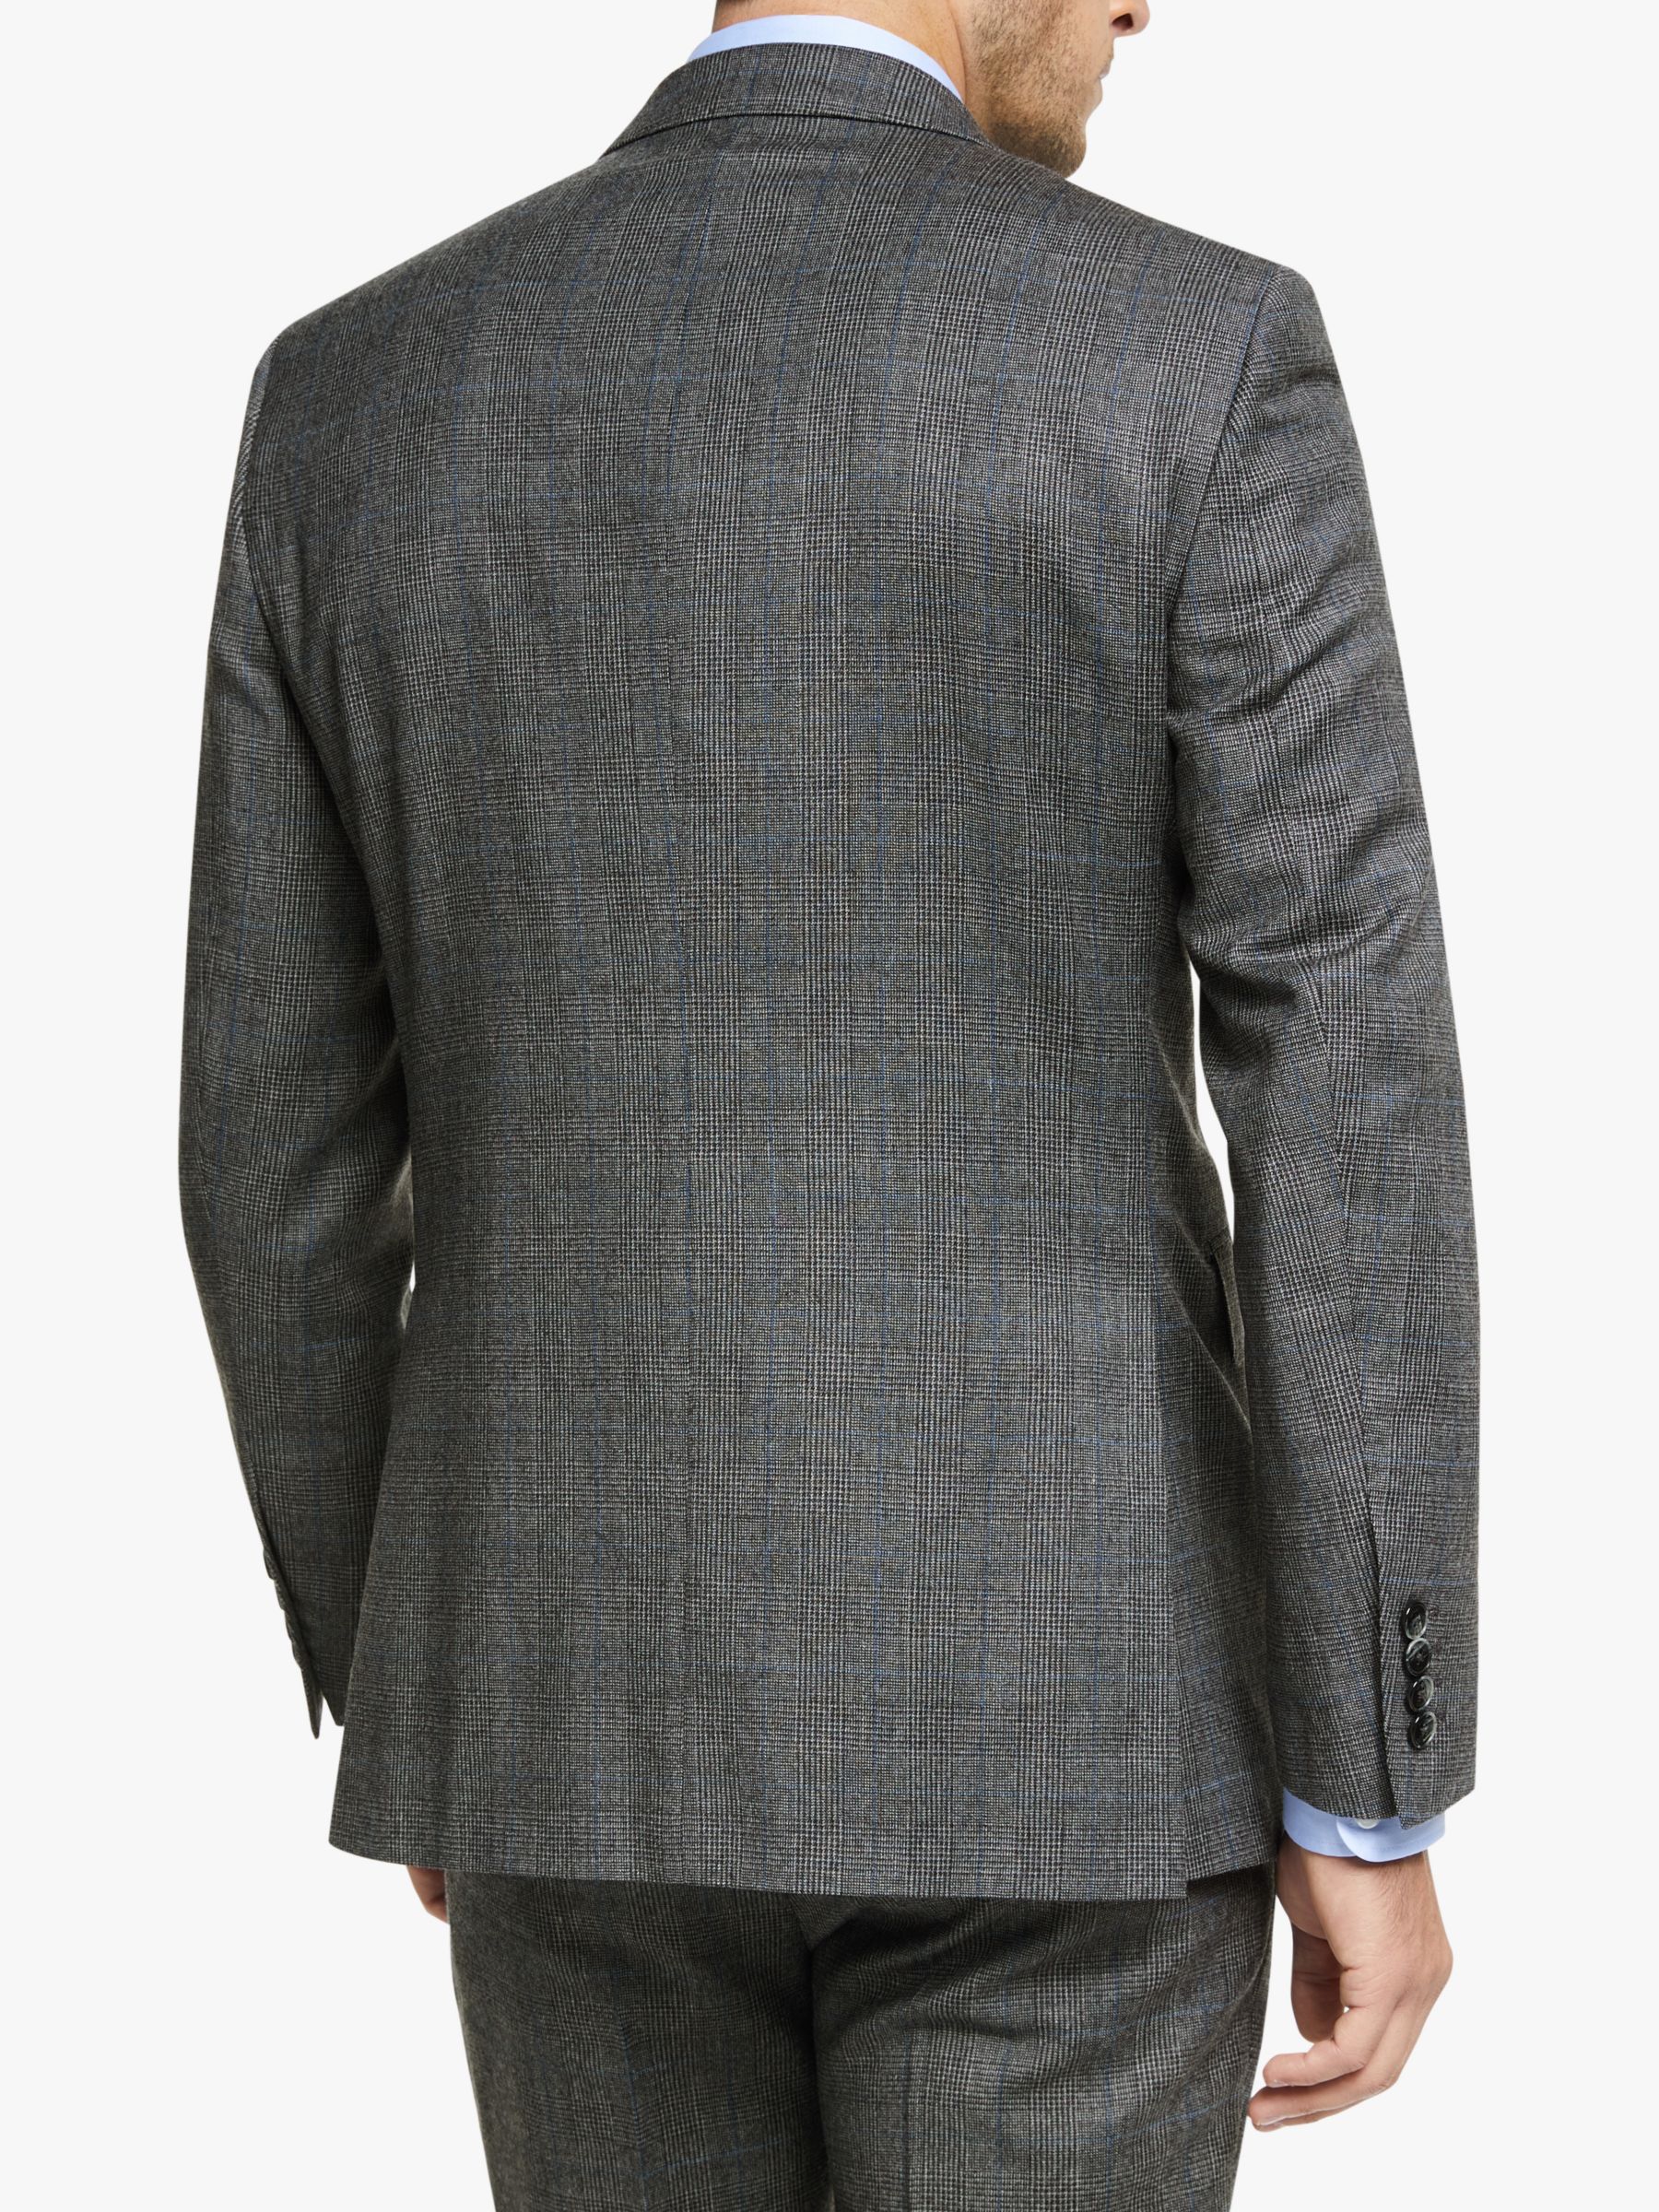 Hackett London Chelsea Prince of Wales Check Tailored Suit Jacket, Grey ...